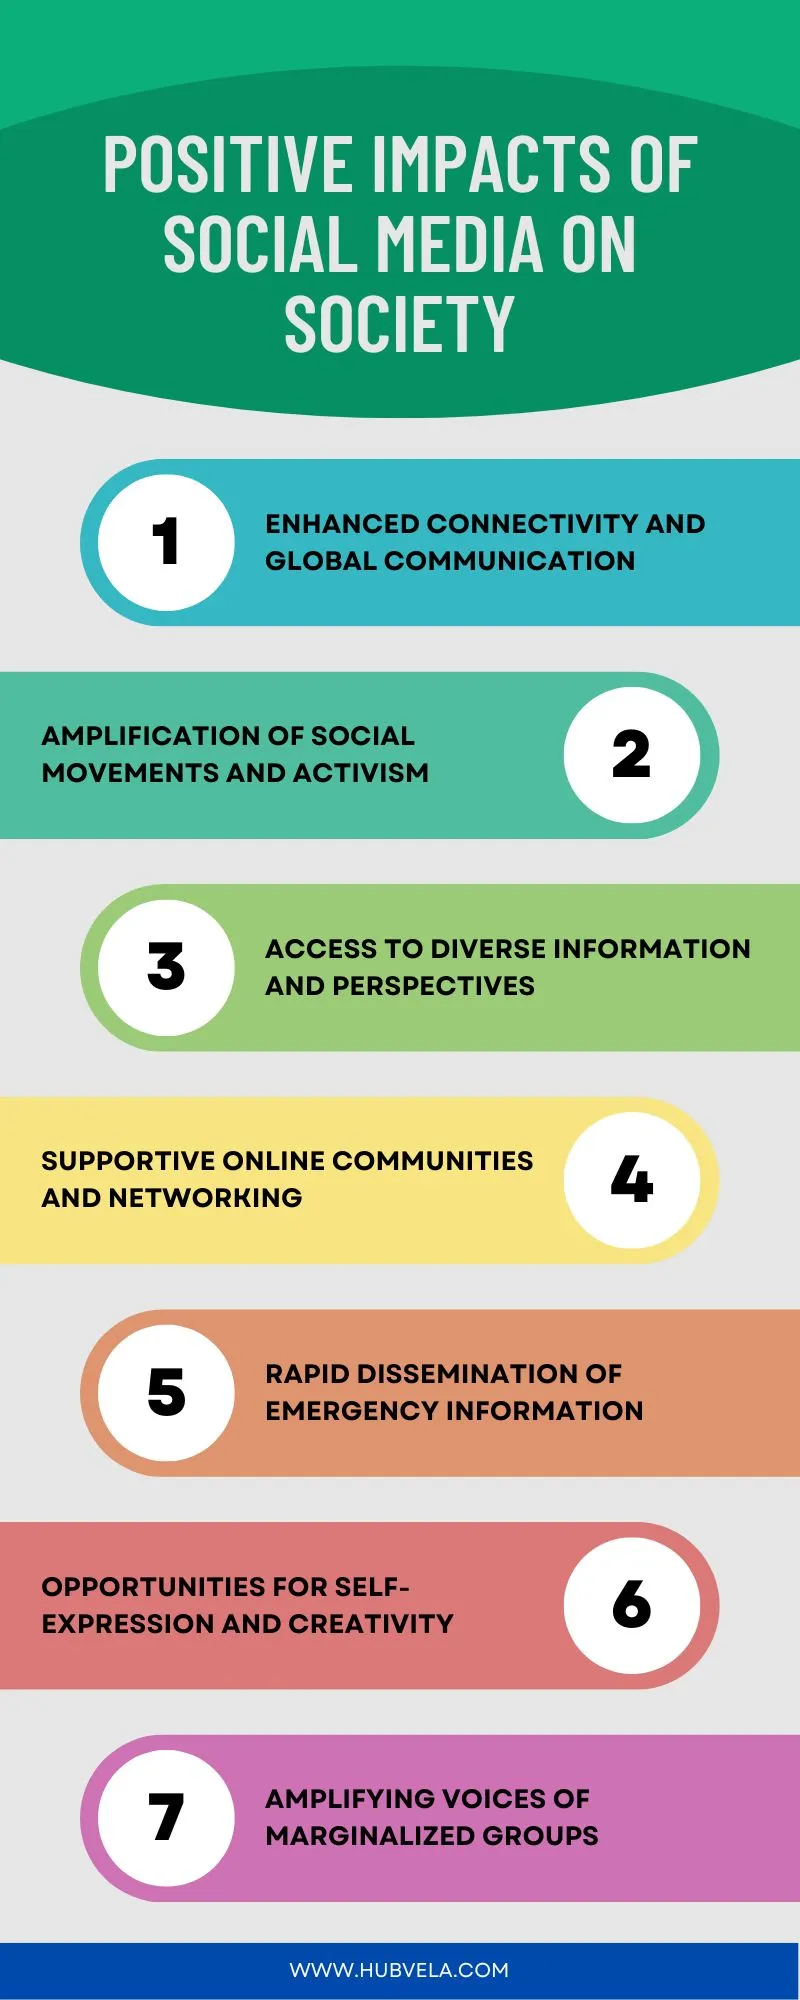 Positive Impacts of Social Media on Society Infographic